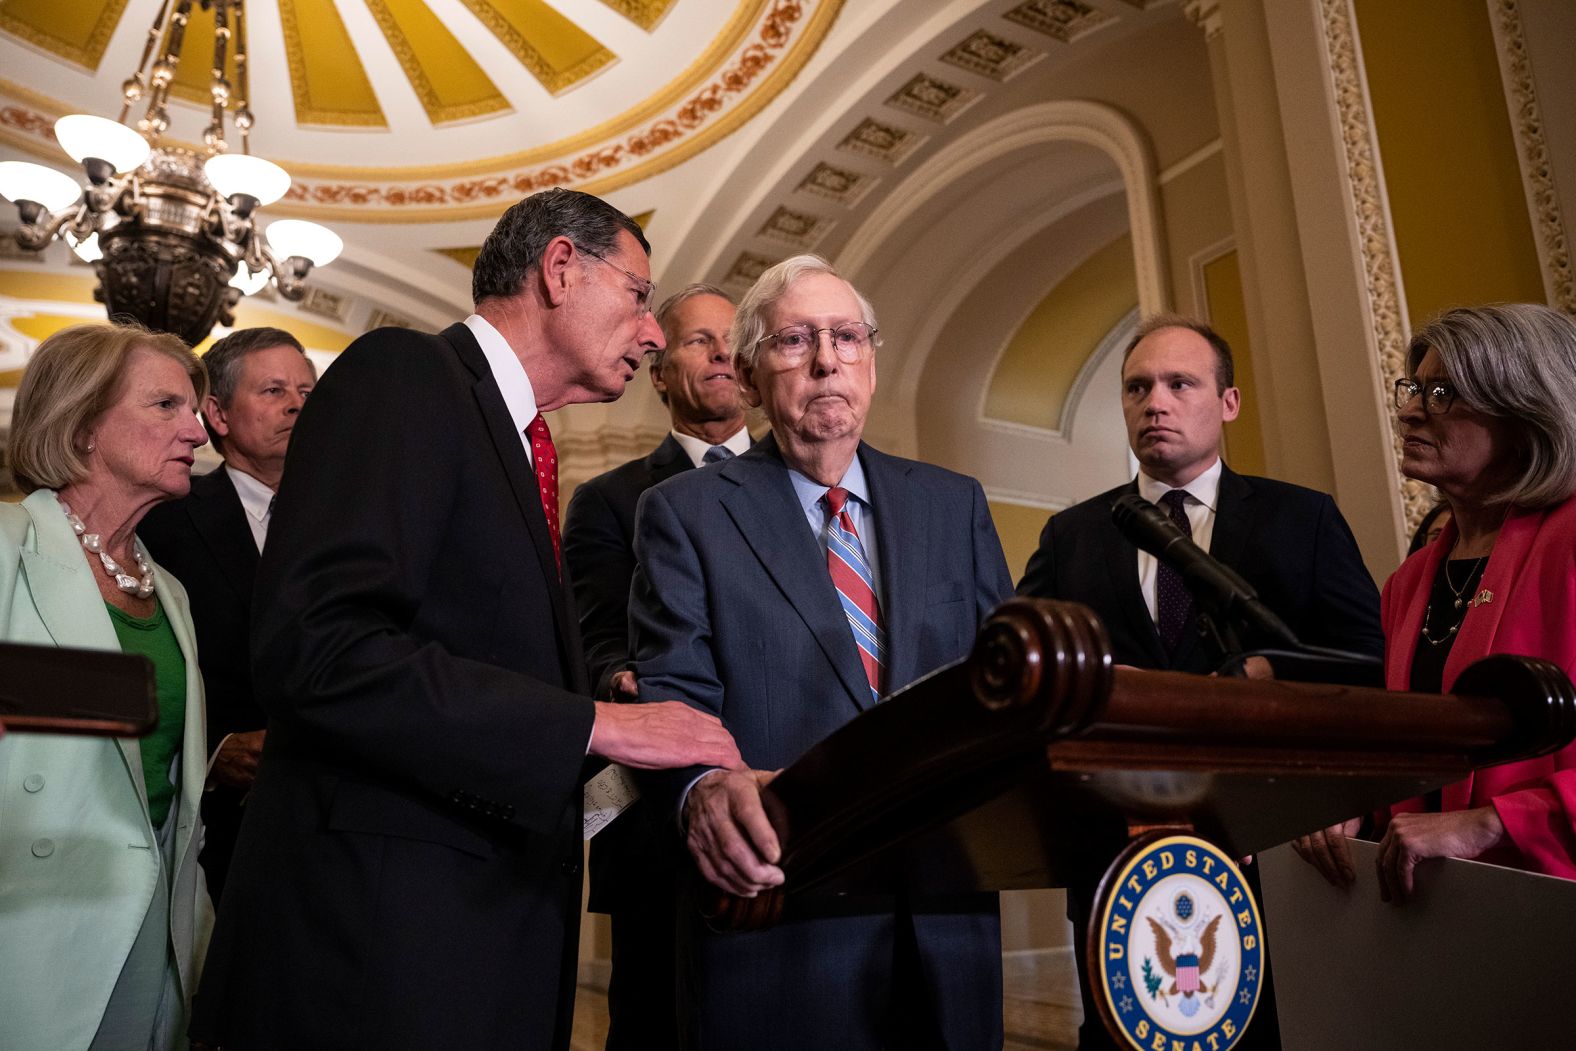 US Sen. John Barrasso reaches out to help McConnell after McConnell <a href="index.php?page=&url=https%3A%2F%2Fwww.cnn.com%2F2023%2F07%2F26%2Fpolitics%2Fmitch-mcconnell-freezes-press-conference%2Findex.html" target="_blank">froze and stopped talking</a> during a news conference at the Capitol in July 2023. McConnell was led away from the news conference and toward his office by an aide. He returned a few minutes later and continued.